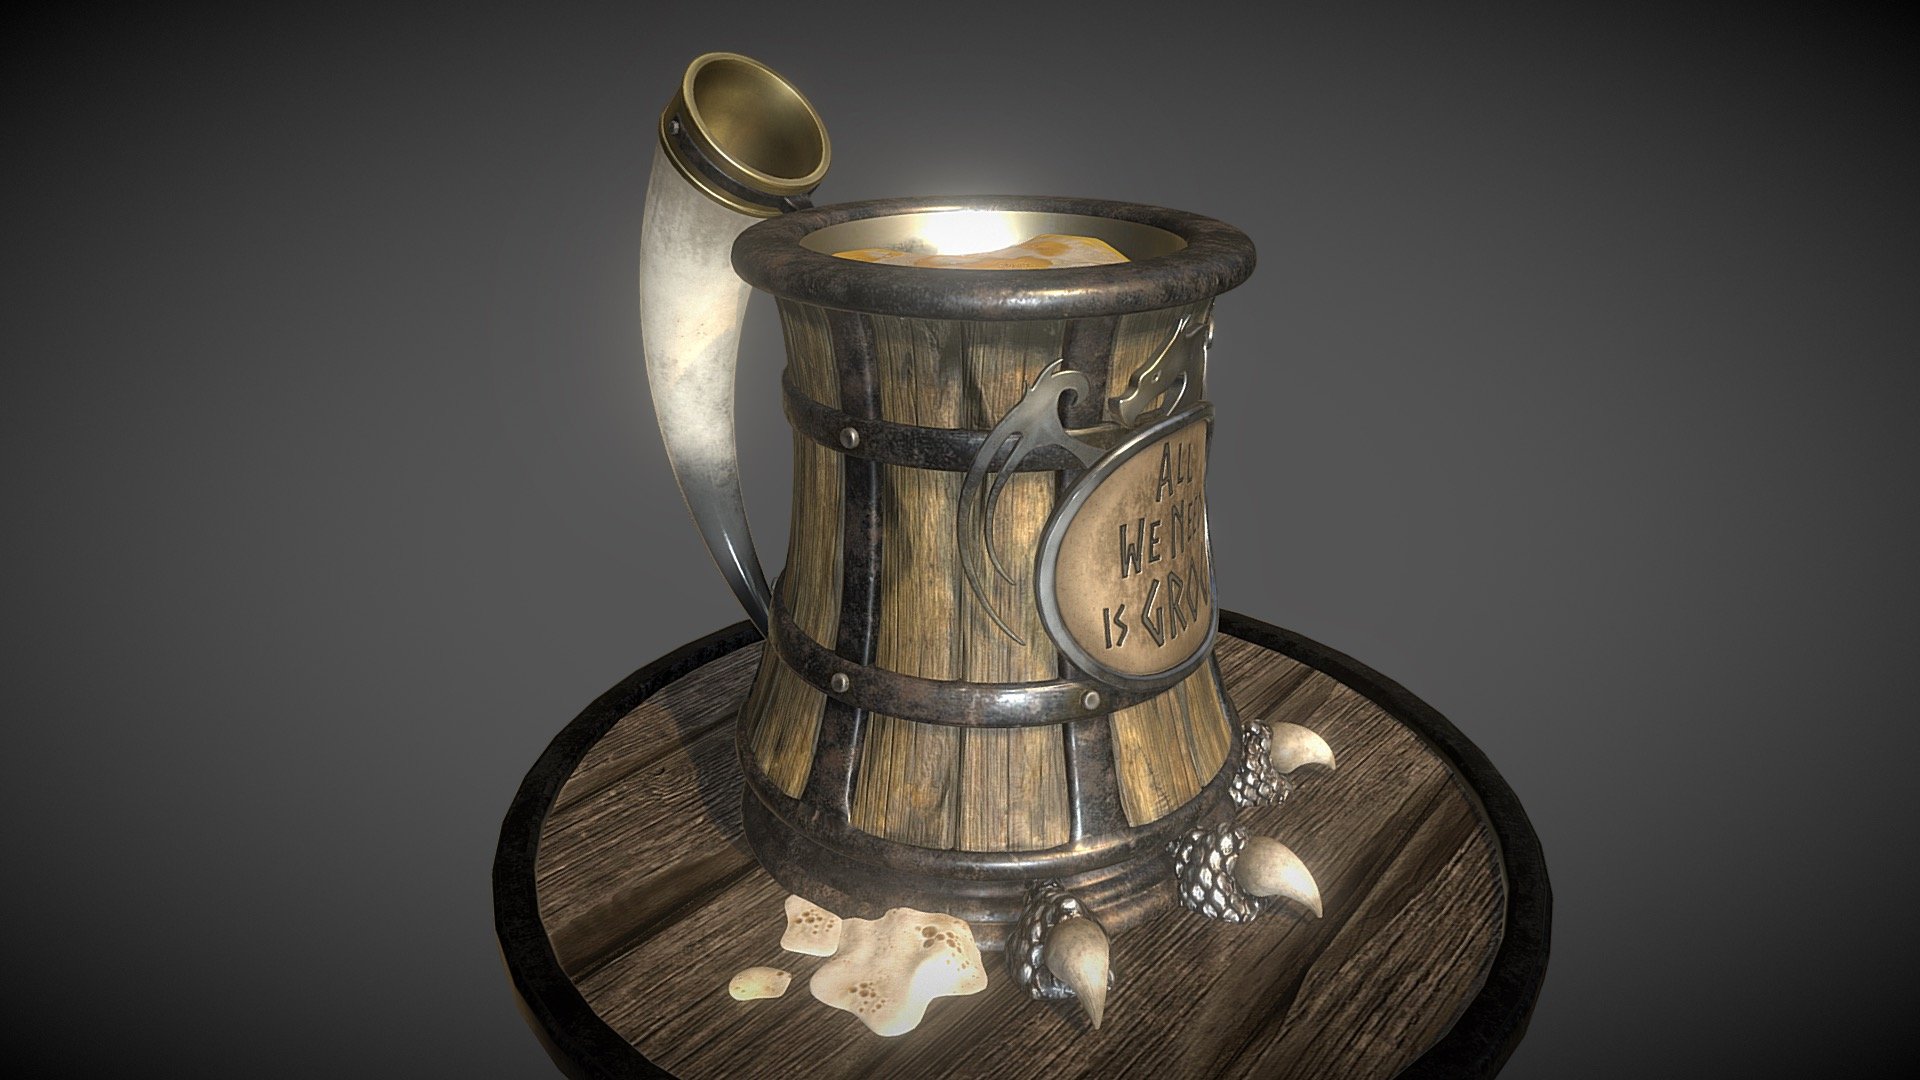 Beer Bust Viking Mug made for the GDC Beer Bust Challenge.

Getting Textures Ready 3d model